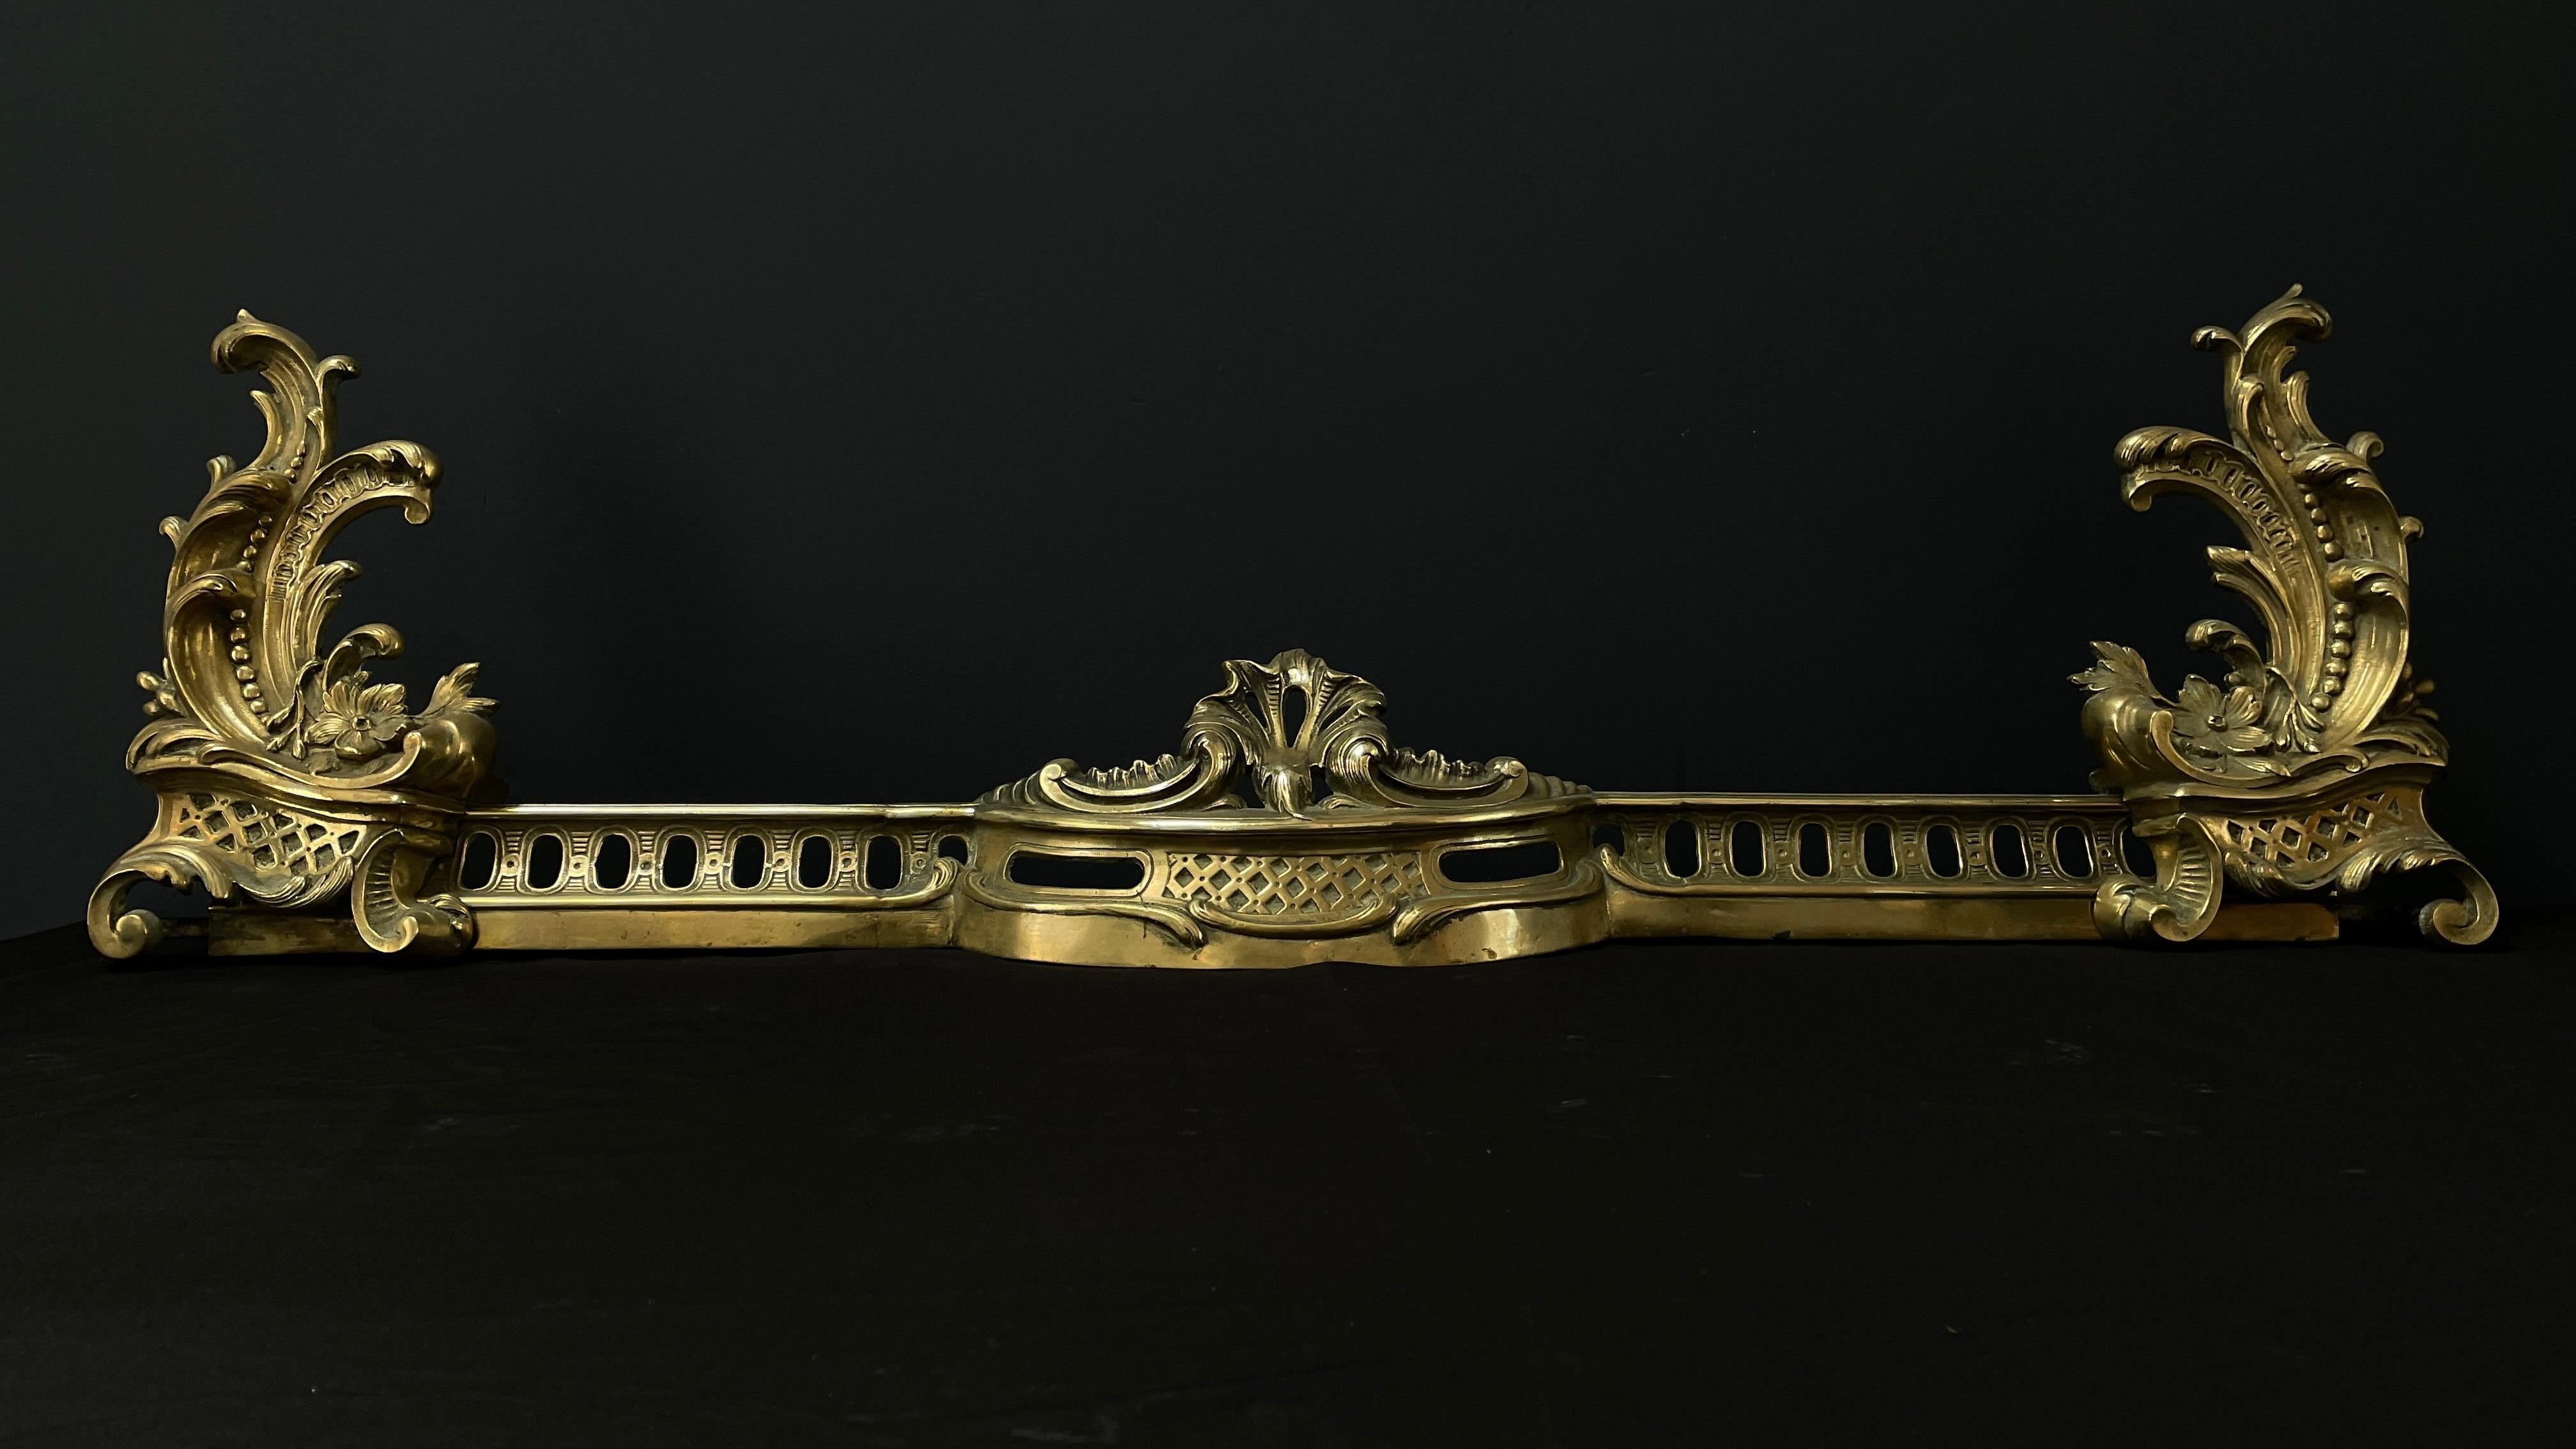 Beautiful bronze antique fireplace fender in the style of Louis XVI. This fender is very rich in detail and in good condition. The width of the fender is adjustable to suit your situation. This is peace is originally from France and in good